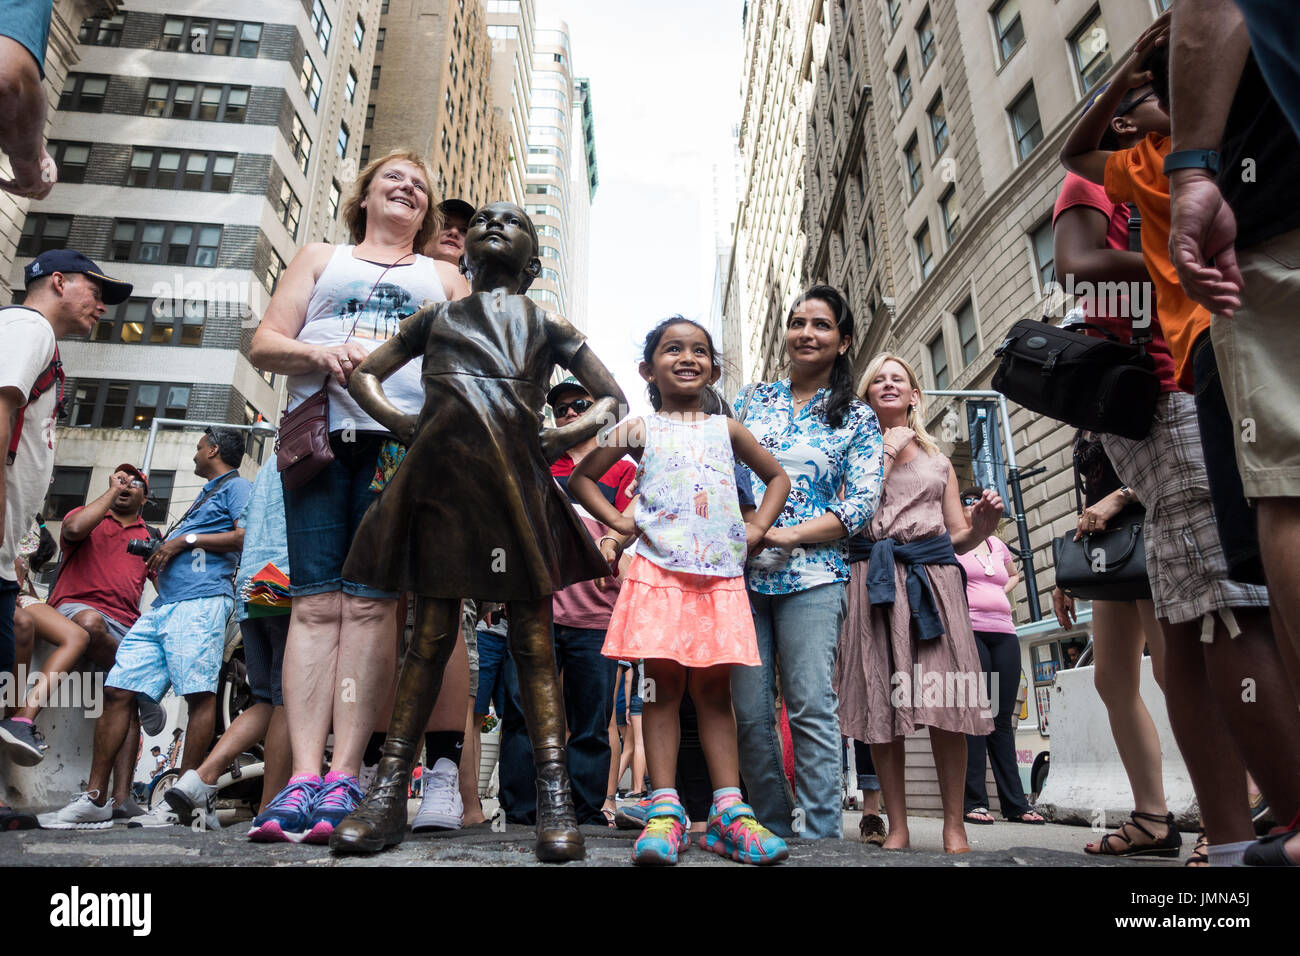 Young girl, with her family, posing at the front of the Fearless Girl bronze sculpture on Wall Street, NY Stock Photo